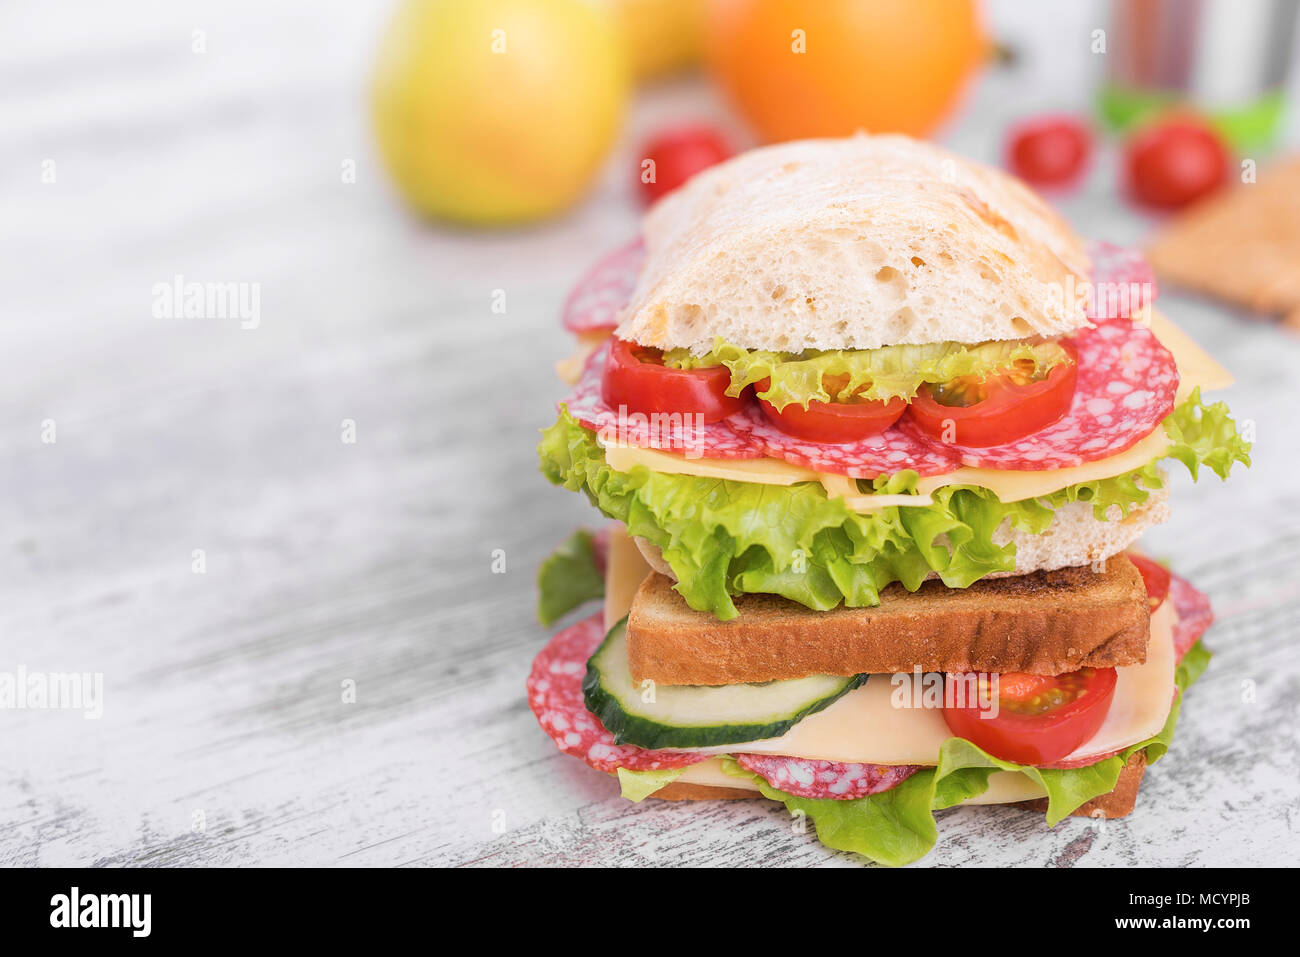 Sandwich on the table. Stock Photo